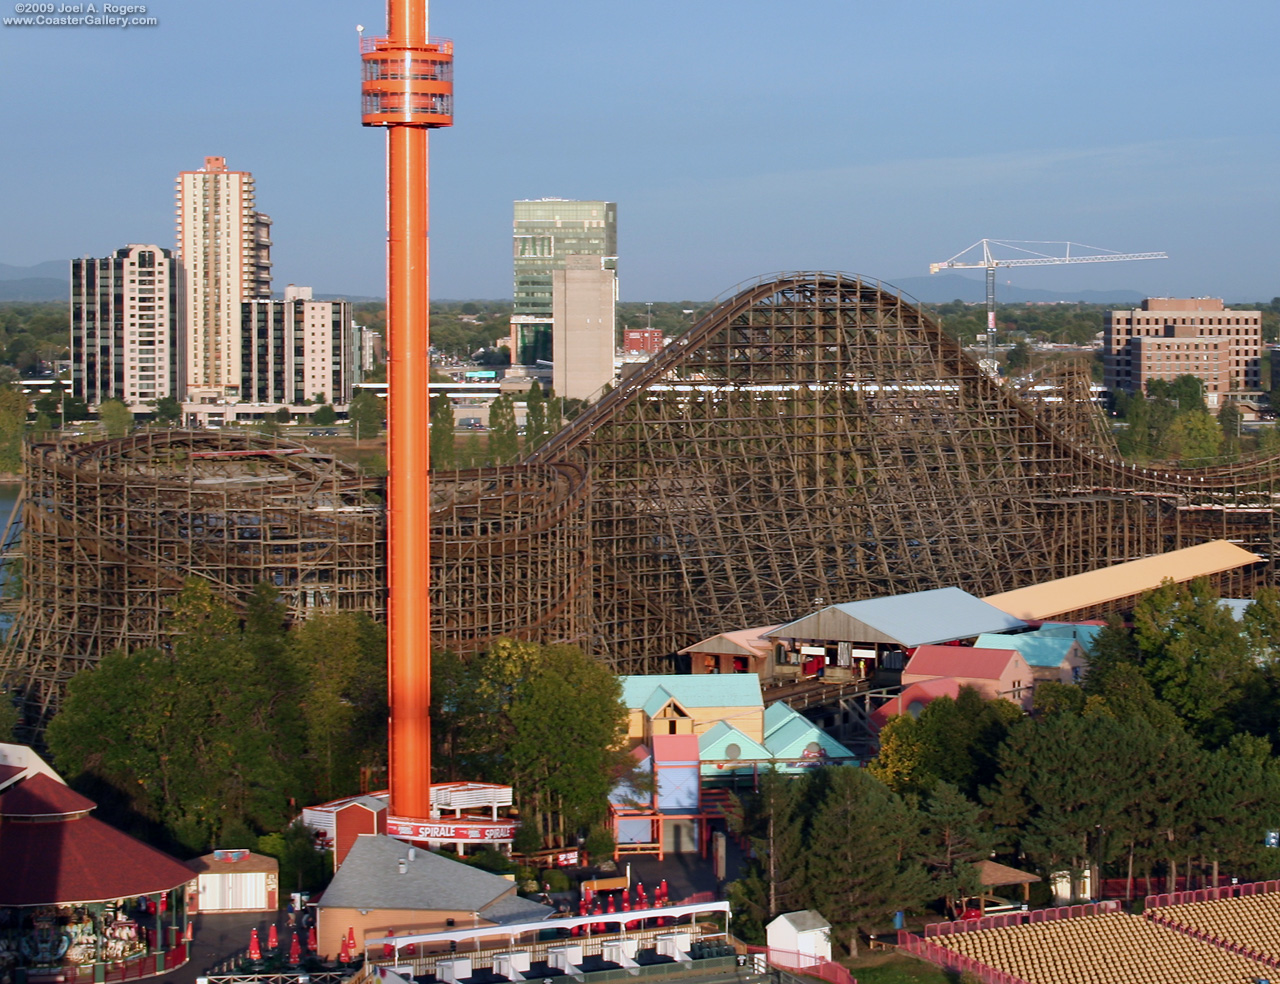 A view of La Ronde and Montreal, Quebec